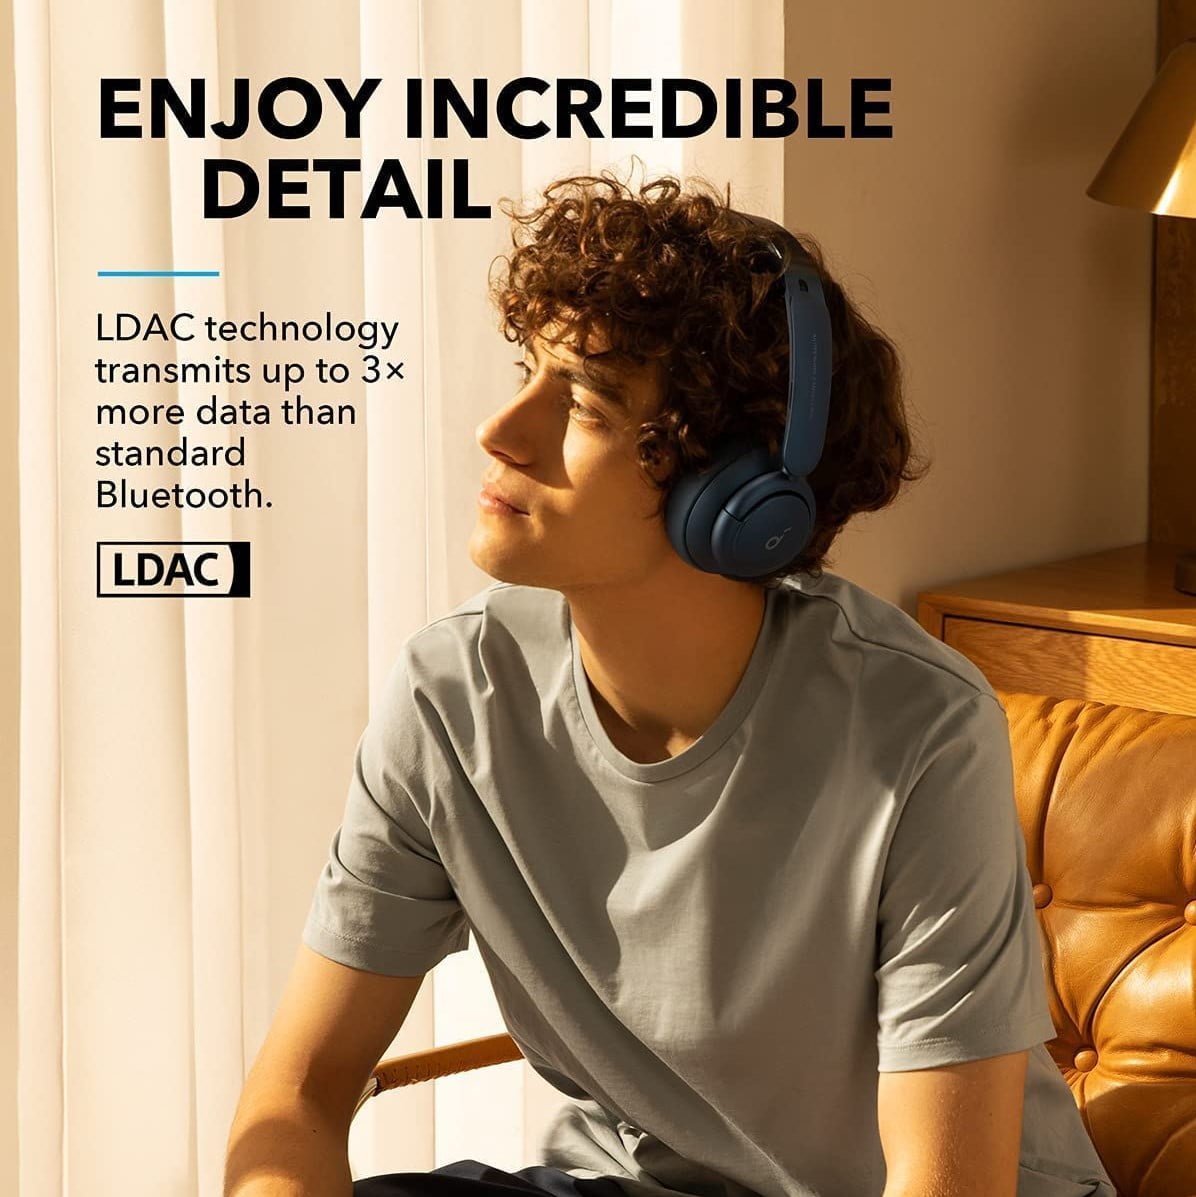 71Jldpedd5L. Ac Sl1500 Soundcore &Lt;H1&Gt;Anker Soundcore Life Q35&Lt;/H1&Gt; Https://Www.youtube.com/Watch?V=Fccvnxekawe &Lt;Ul Class=&Quot;A-Unordered-List A-Vertical A-Spacing-Mini&Quot;&Gt; &Lt;Li&Gt;&Lt;Span Class=&Quot;A-List-Item&Quot;&Gt;&Lt;Strong&Gt;Gold Standard Of Sound:&Lt;/Strong&Gt; Custom Silk-Diaphragm Drivers Accurately Reproduce Music Across A Wider Frequency Range And Cut Out Distortion To Deliver Sound That’s Both Hi-Res Audio And Hi-Res Audio Wireless Certified.&Lt;/Span&Gt;&Lt;/Li&Gt; &Lt;Li&Gt;&Lt;Span Class=&Quot;A-List-Item&Quot;&Gt;&Lt;Strong&Gt;Ldac Technology:&Lt;/Strong&Gt; 3 Times More Data Is Transmitted To Life Q35 Active Noise Cancelling Headphones Than Via Standard Bluetooth Codecs. This Lossless Transfer Ensures You Hear Every Tiny Detail In The Music.&Lt;/Span&Gt;&Lt;/Li&Gt; &Lt;Li&Gt;&Lt;Span Class=&Quot;A-List-Item&Quot;&Gt;&Lt;Strong&Gt;Multi-Mode Noise Cancelling:&Lt;/Strong&Gt; 2 Microphones On Each Earcup Detect And Filter Out Distracting Noises In Your Vicinity. Switch Between Transport, Outdoor, And Indoor Modes For A Tailored Noise Cancelling Experience.&Lt;/Span&Gt;&Lt;/Li&Gt; &Lt;Li&Gt;&Lt;Span Class=&Quot;A-List-Item&Quot;&Gt;&Lt;Strong&Gt;Comfortable And Convenient:&Lt;/Strong&Gt; Life Q35 Active Noise Cancelling Headphones Can Be Worn All Day Thanks To Their Lightweight Build And Memory Foam Padded Earcups And Headband. A Built-In Sensor Detects When They’re Removed From Your Ears And Instantly Pauses The Audio.&Lt;/Span&Gt;&Lt;/Li&Gt; &Lt;Li&Gt;&Lt;Span Class=&Quot;A-List-Item&Quot;&Gt;&Lt;Strong&Gt;Ai-Enhanced Calls:&Lt;/Strong&Gt; The Beamforming Microphones On Life Q35 Active Noise Cancelling Headphones Pick Up Your Voice With Incredible Accuracy By Using An Ai Algorithm That’s Been Tested Thousands Of Times. Calls Sound Crisp, Clear, And Free Of Unwanted Noise.&Lt;/Span&Gt;&Lt;/Li&Gt; &Lt;/Ul&Gt; &Lt;H5&Gt;Warranty: Anker Product Warranty&Lt;/H5&Gt; &Lt;Pre&Gt;&Lt;B&Gt;We Also Provide International Wholesale And Retail Shipping To All Gcc Countries: Saudi Arabia, Qatar, Oman, Kuwait, Bahrain.&Lt;/B&Gt;&Lt;/Pre&Gt; Headphones Anker Soundcore Life Q35 Headphones - Blue